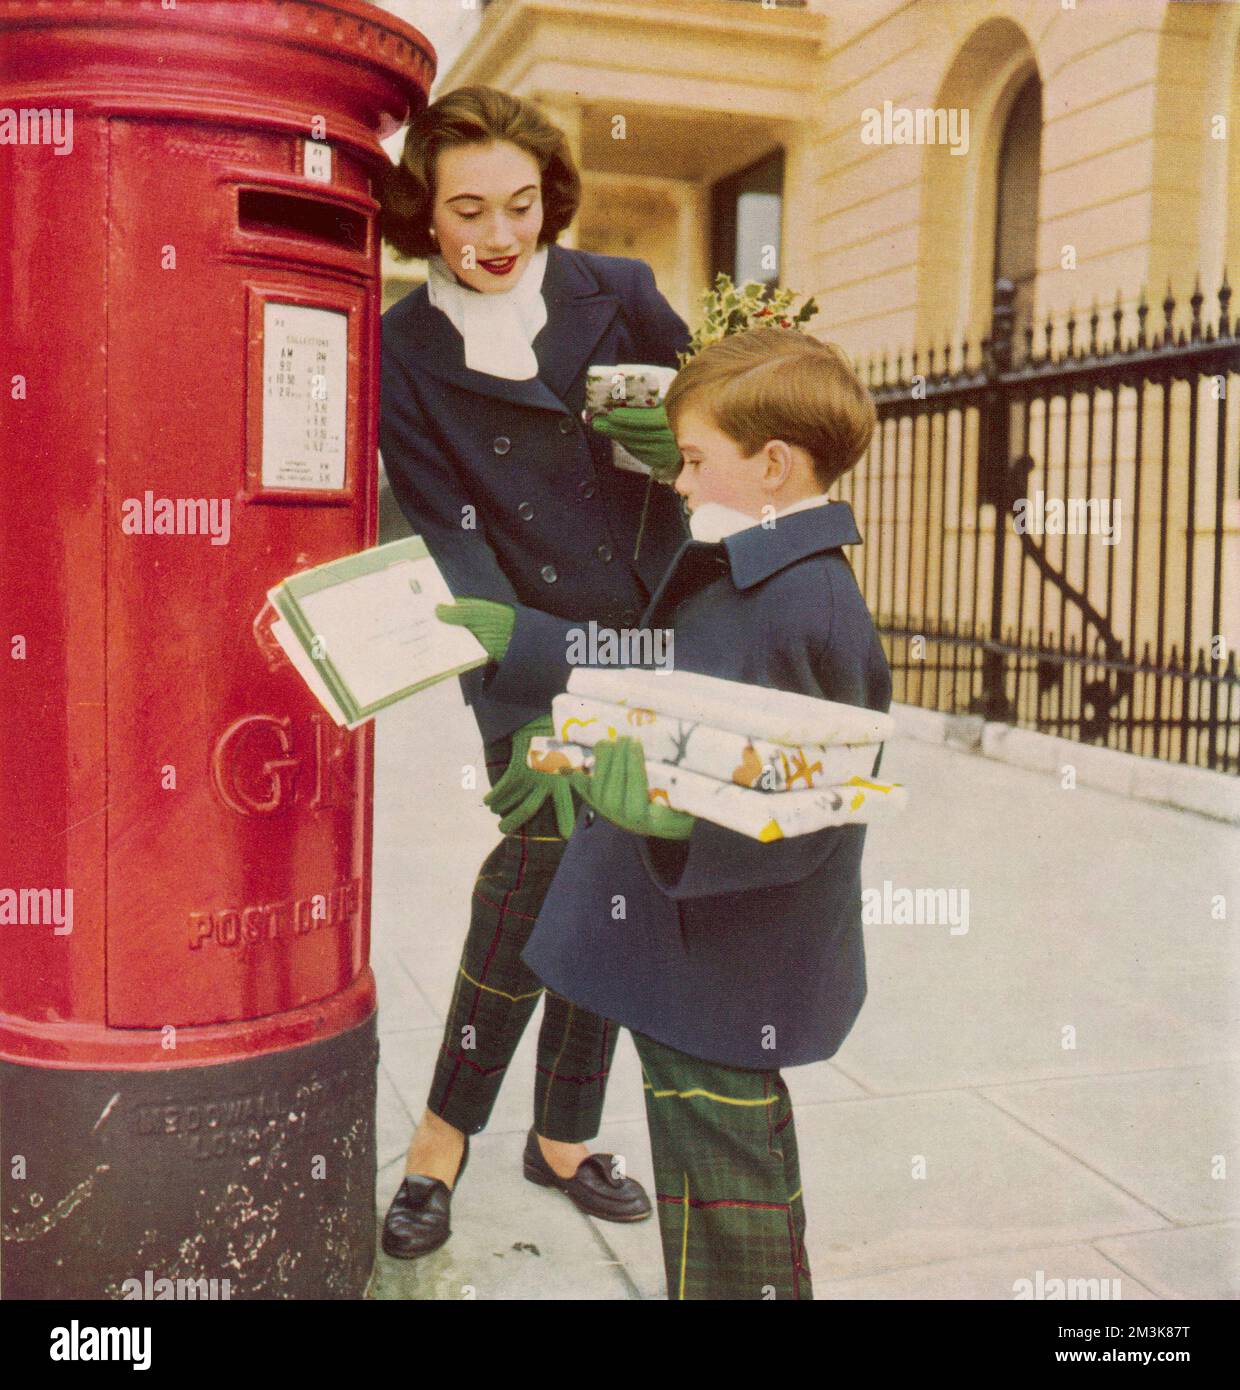 https://c8.alamy.com/comp/2M3K87T/photograph-showing-a-young-boy-with-his-mother-posting-christmas-cards-and-presents-date-2nd-december-1958-2M3K87T.jpg